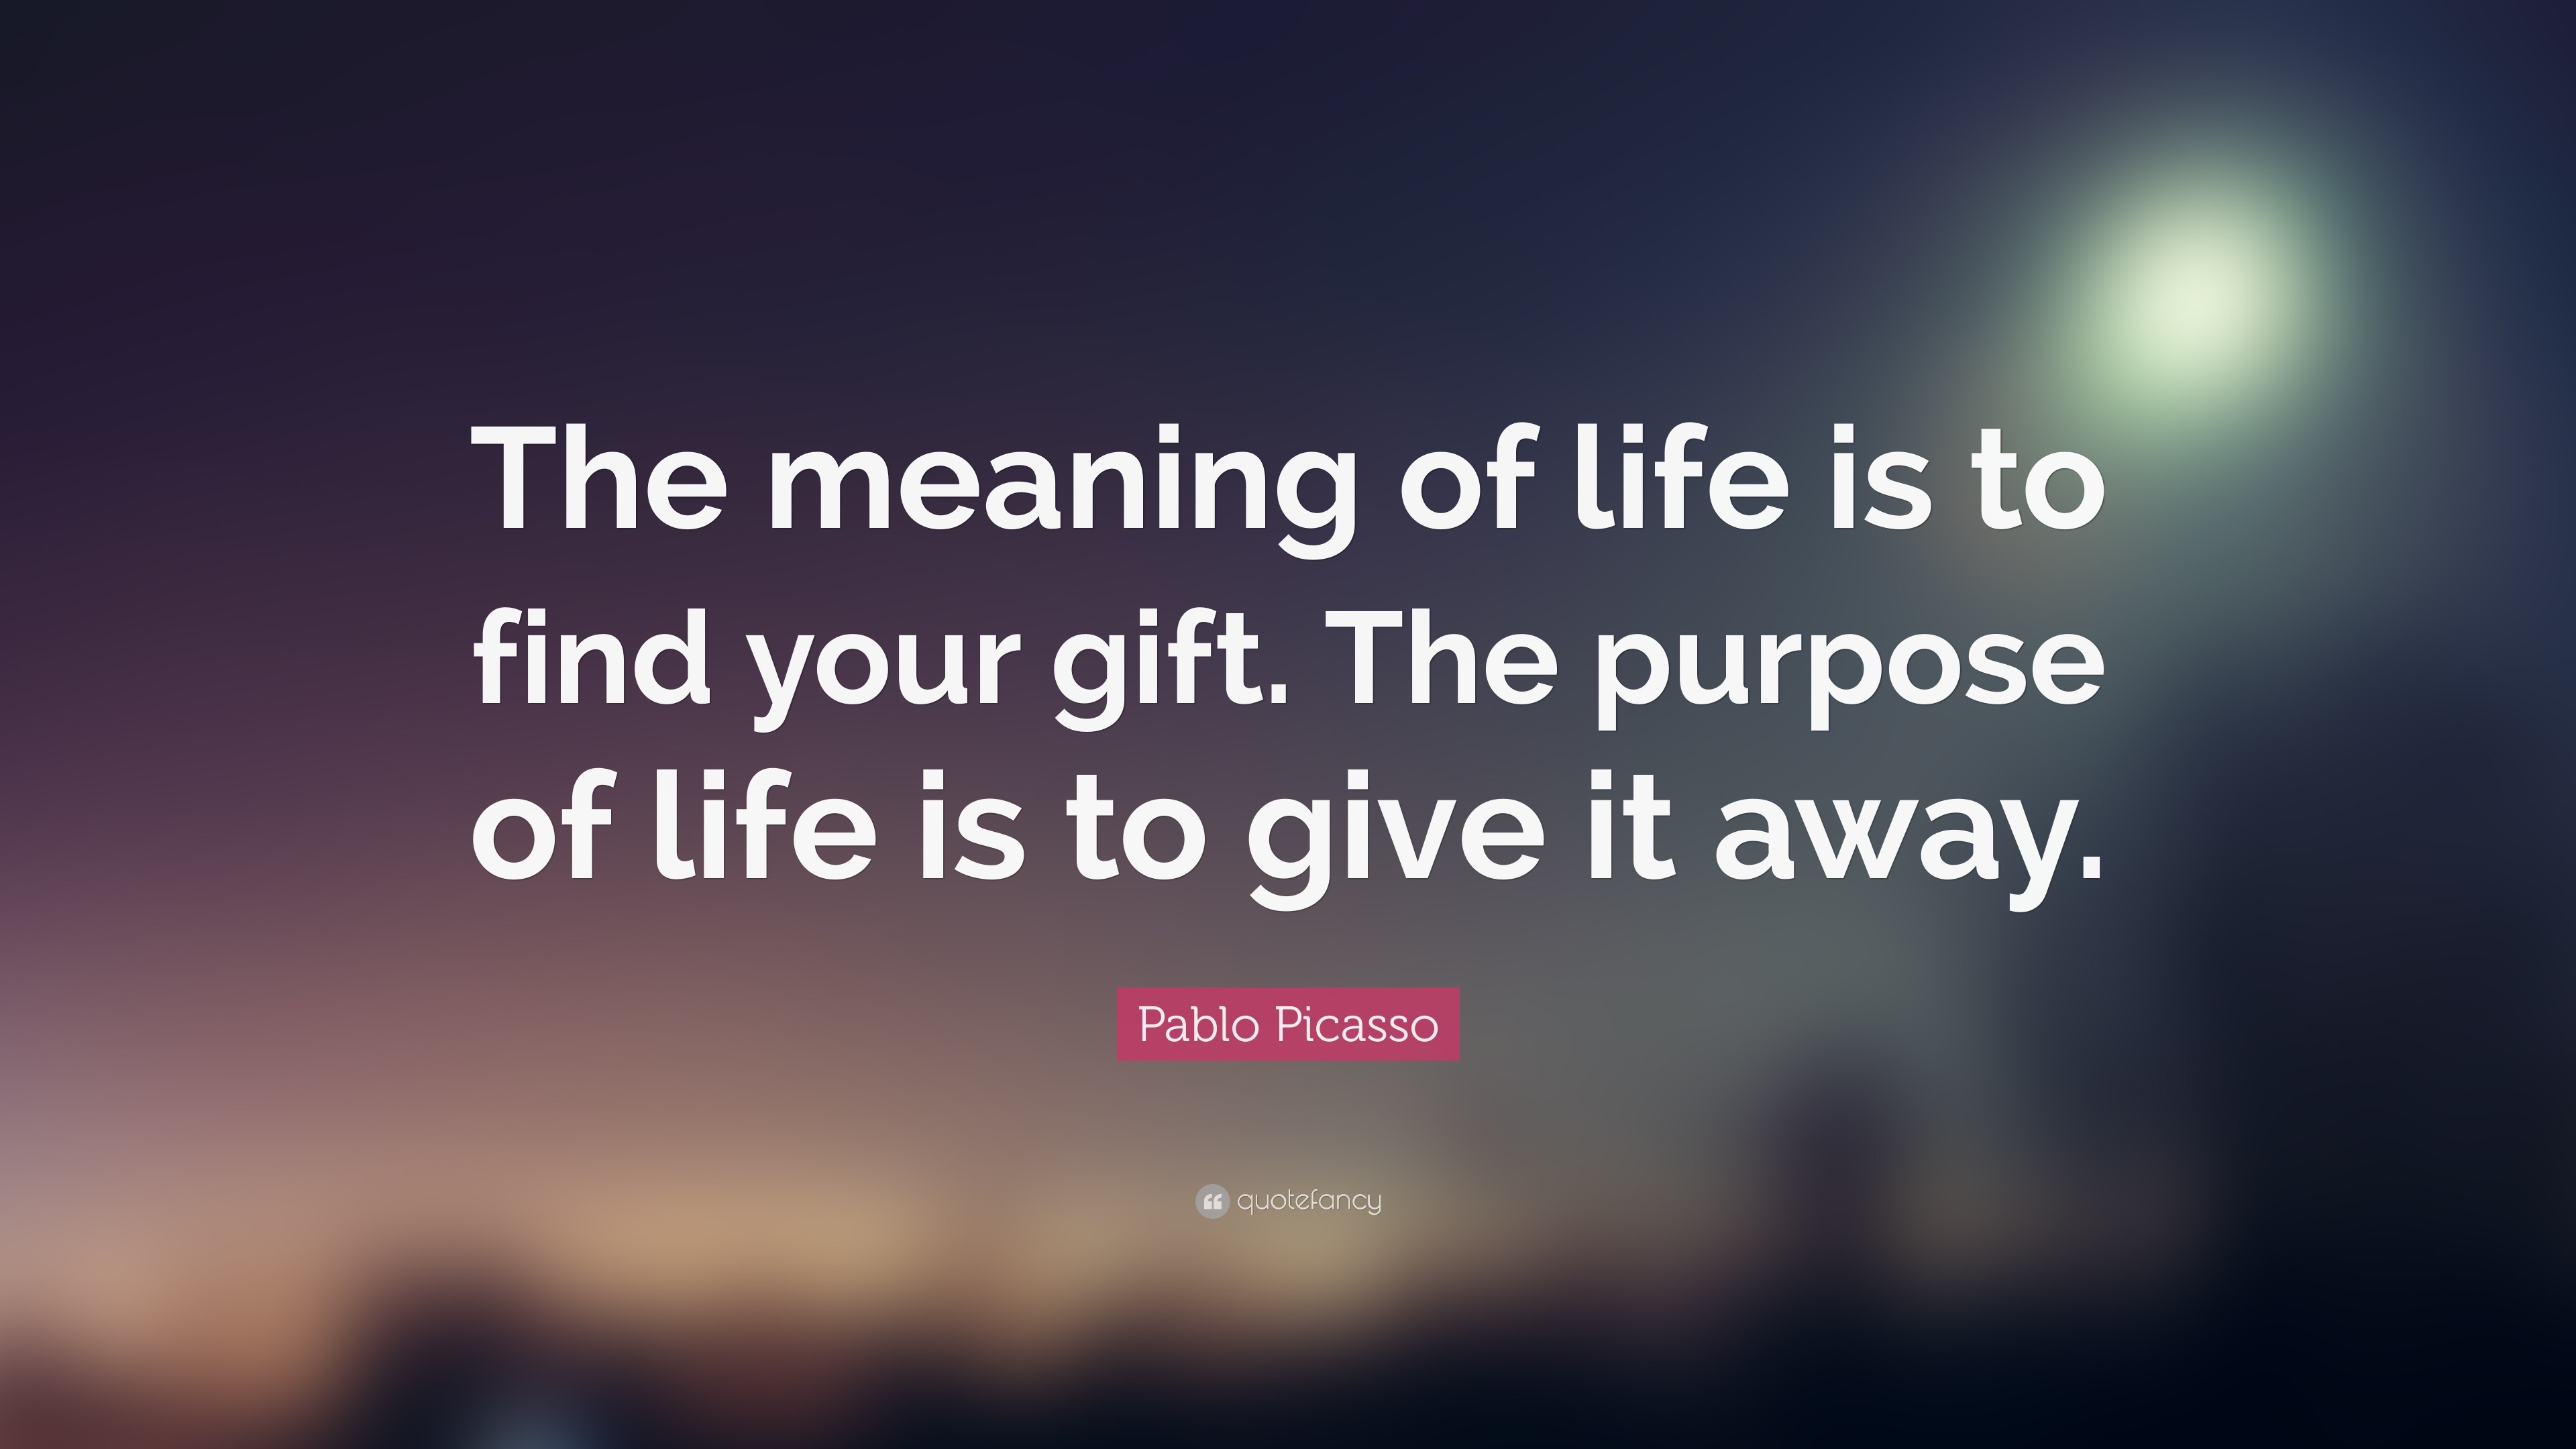 Pablo Picasso Quote “The meaning of life is to find your t The